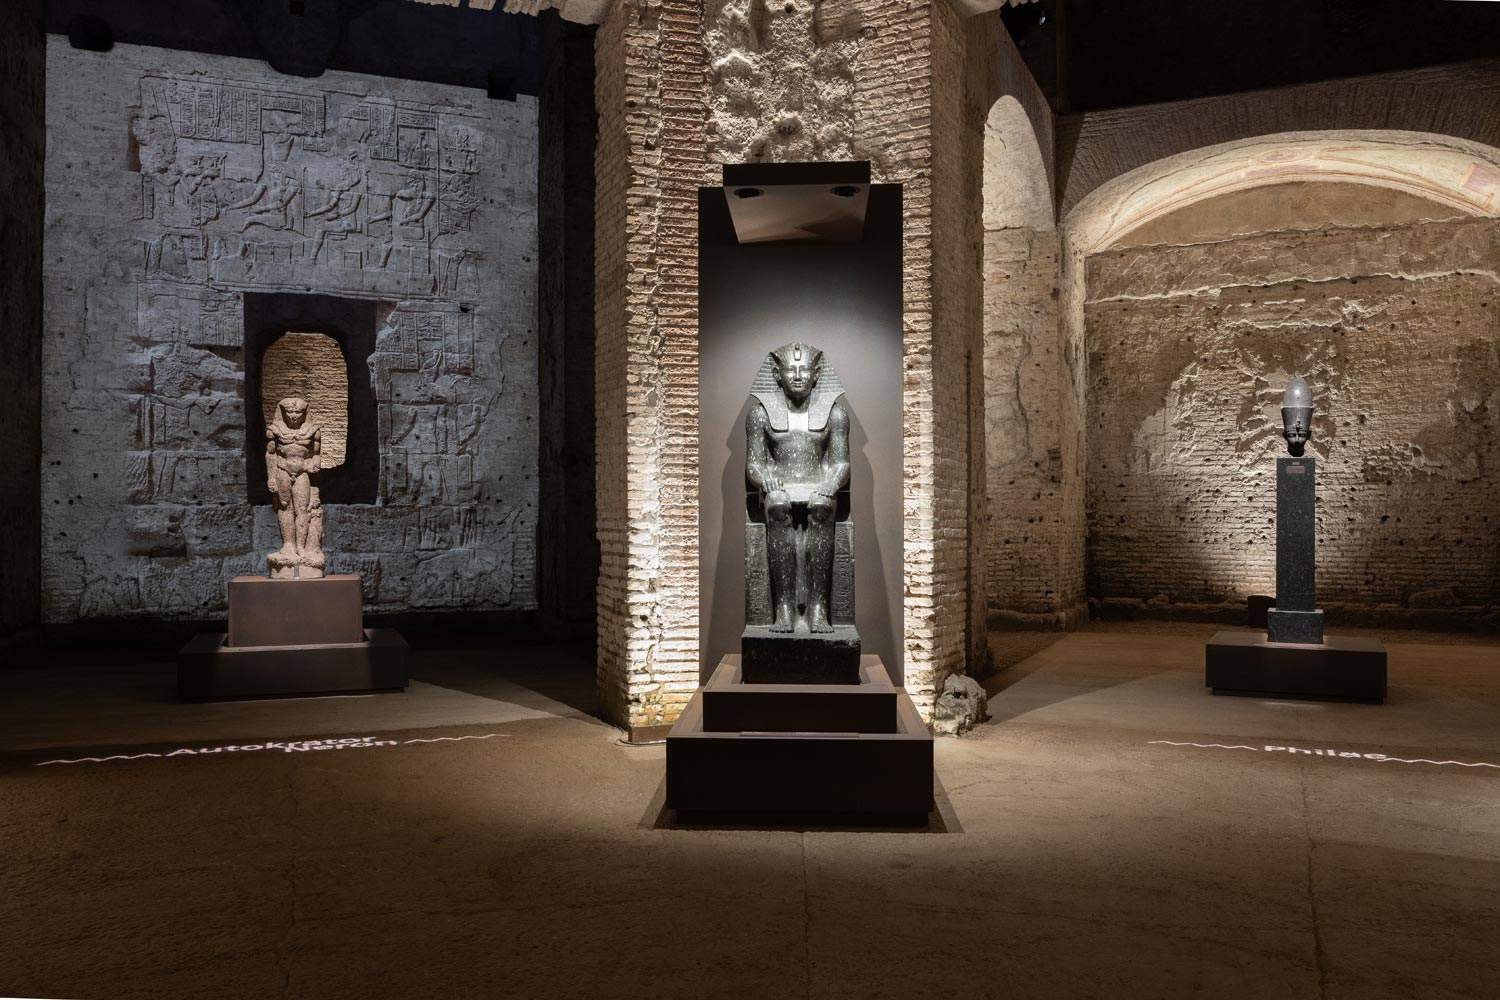 Rome's relations with Egypt as seen through Nero. The major exhibition at the Domus Aurea